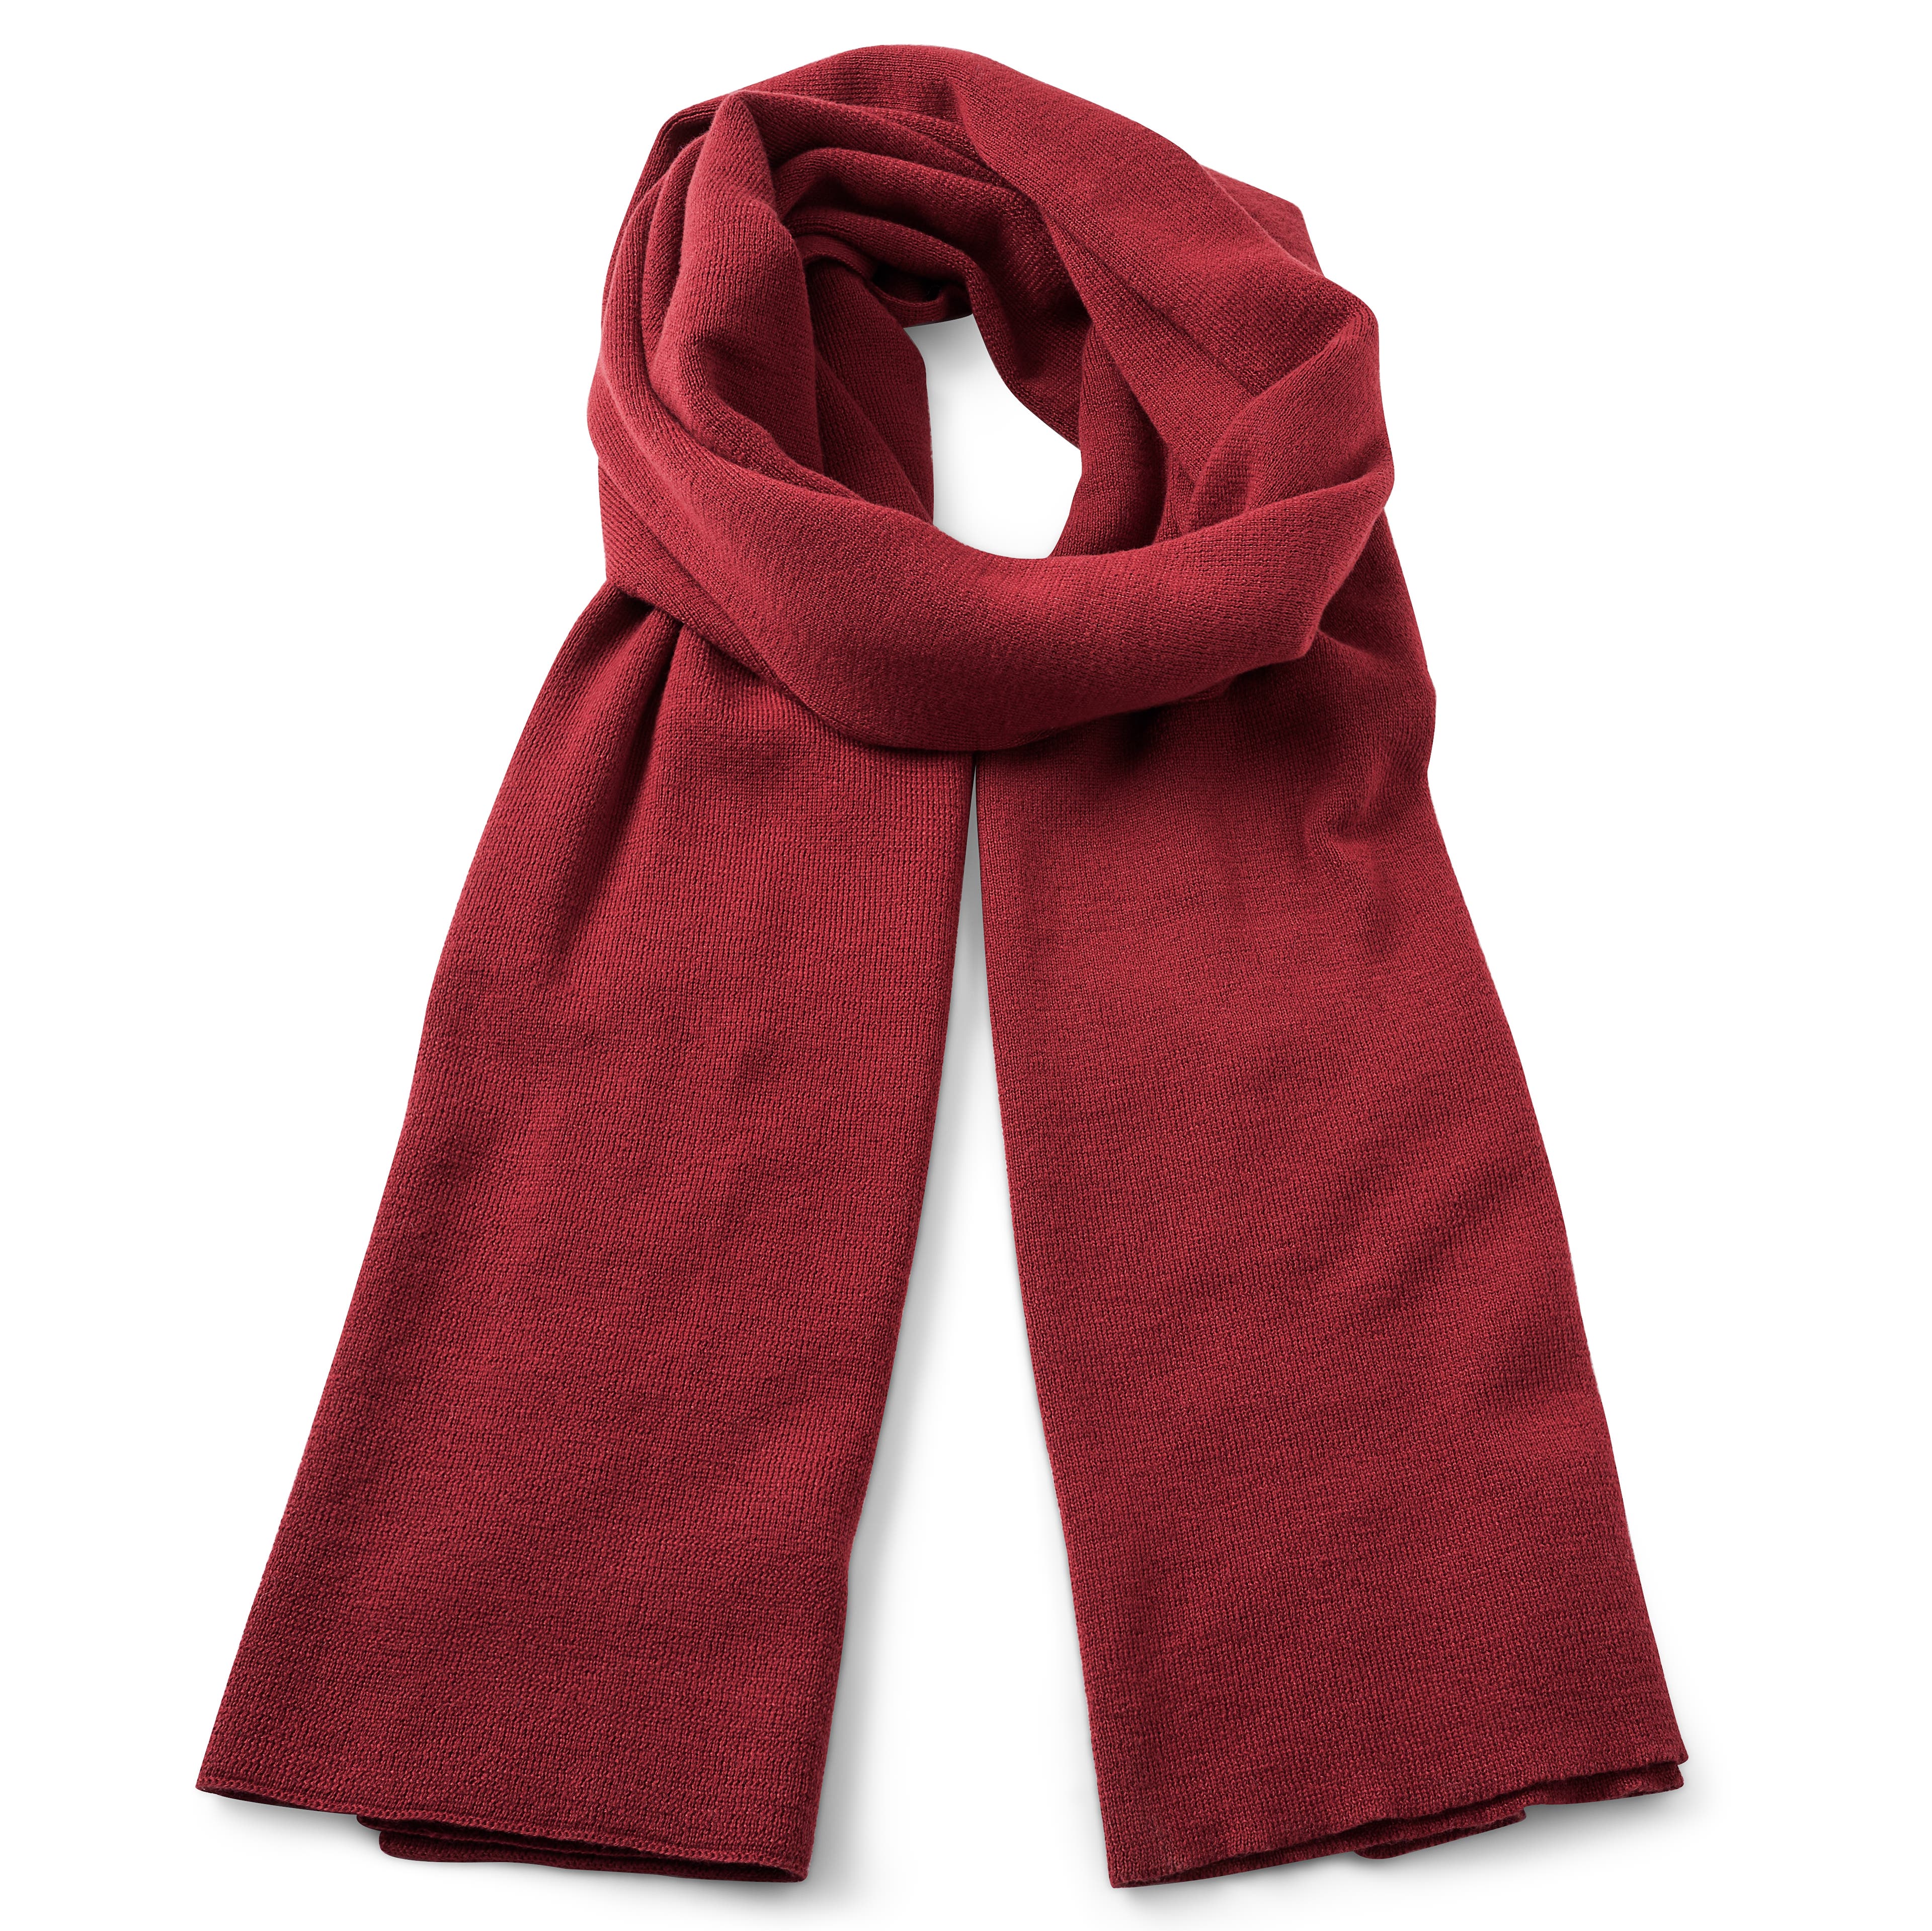 Hiems, Burgundy Recycled Cotton Scarf, In stock!